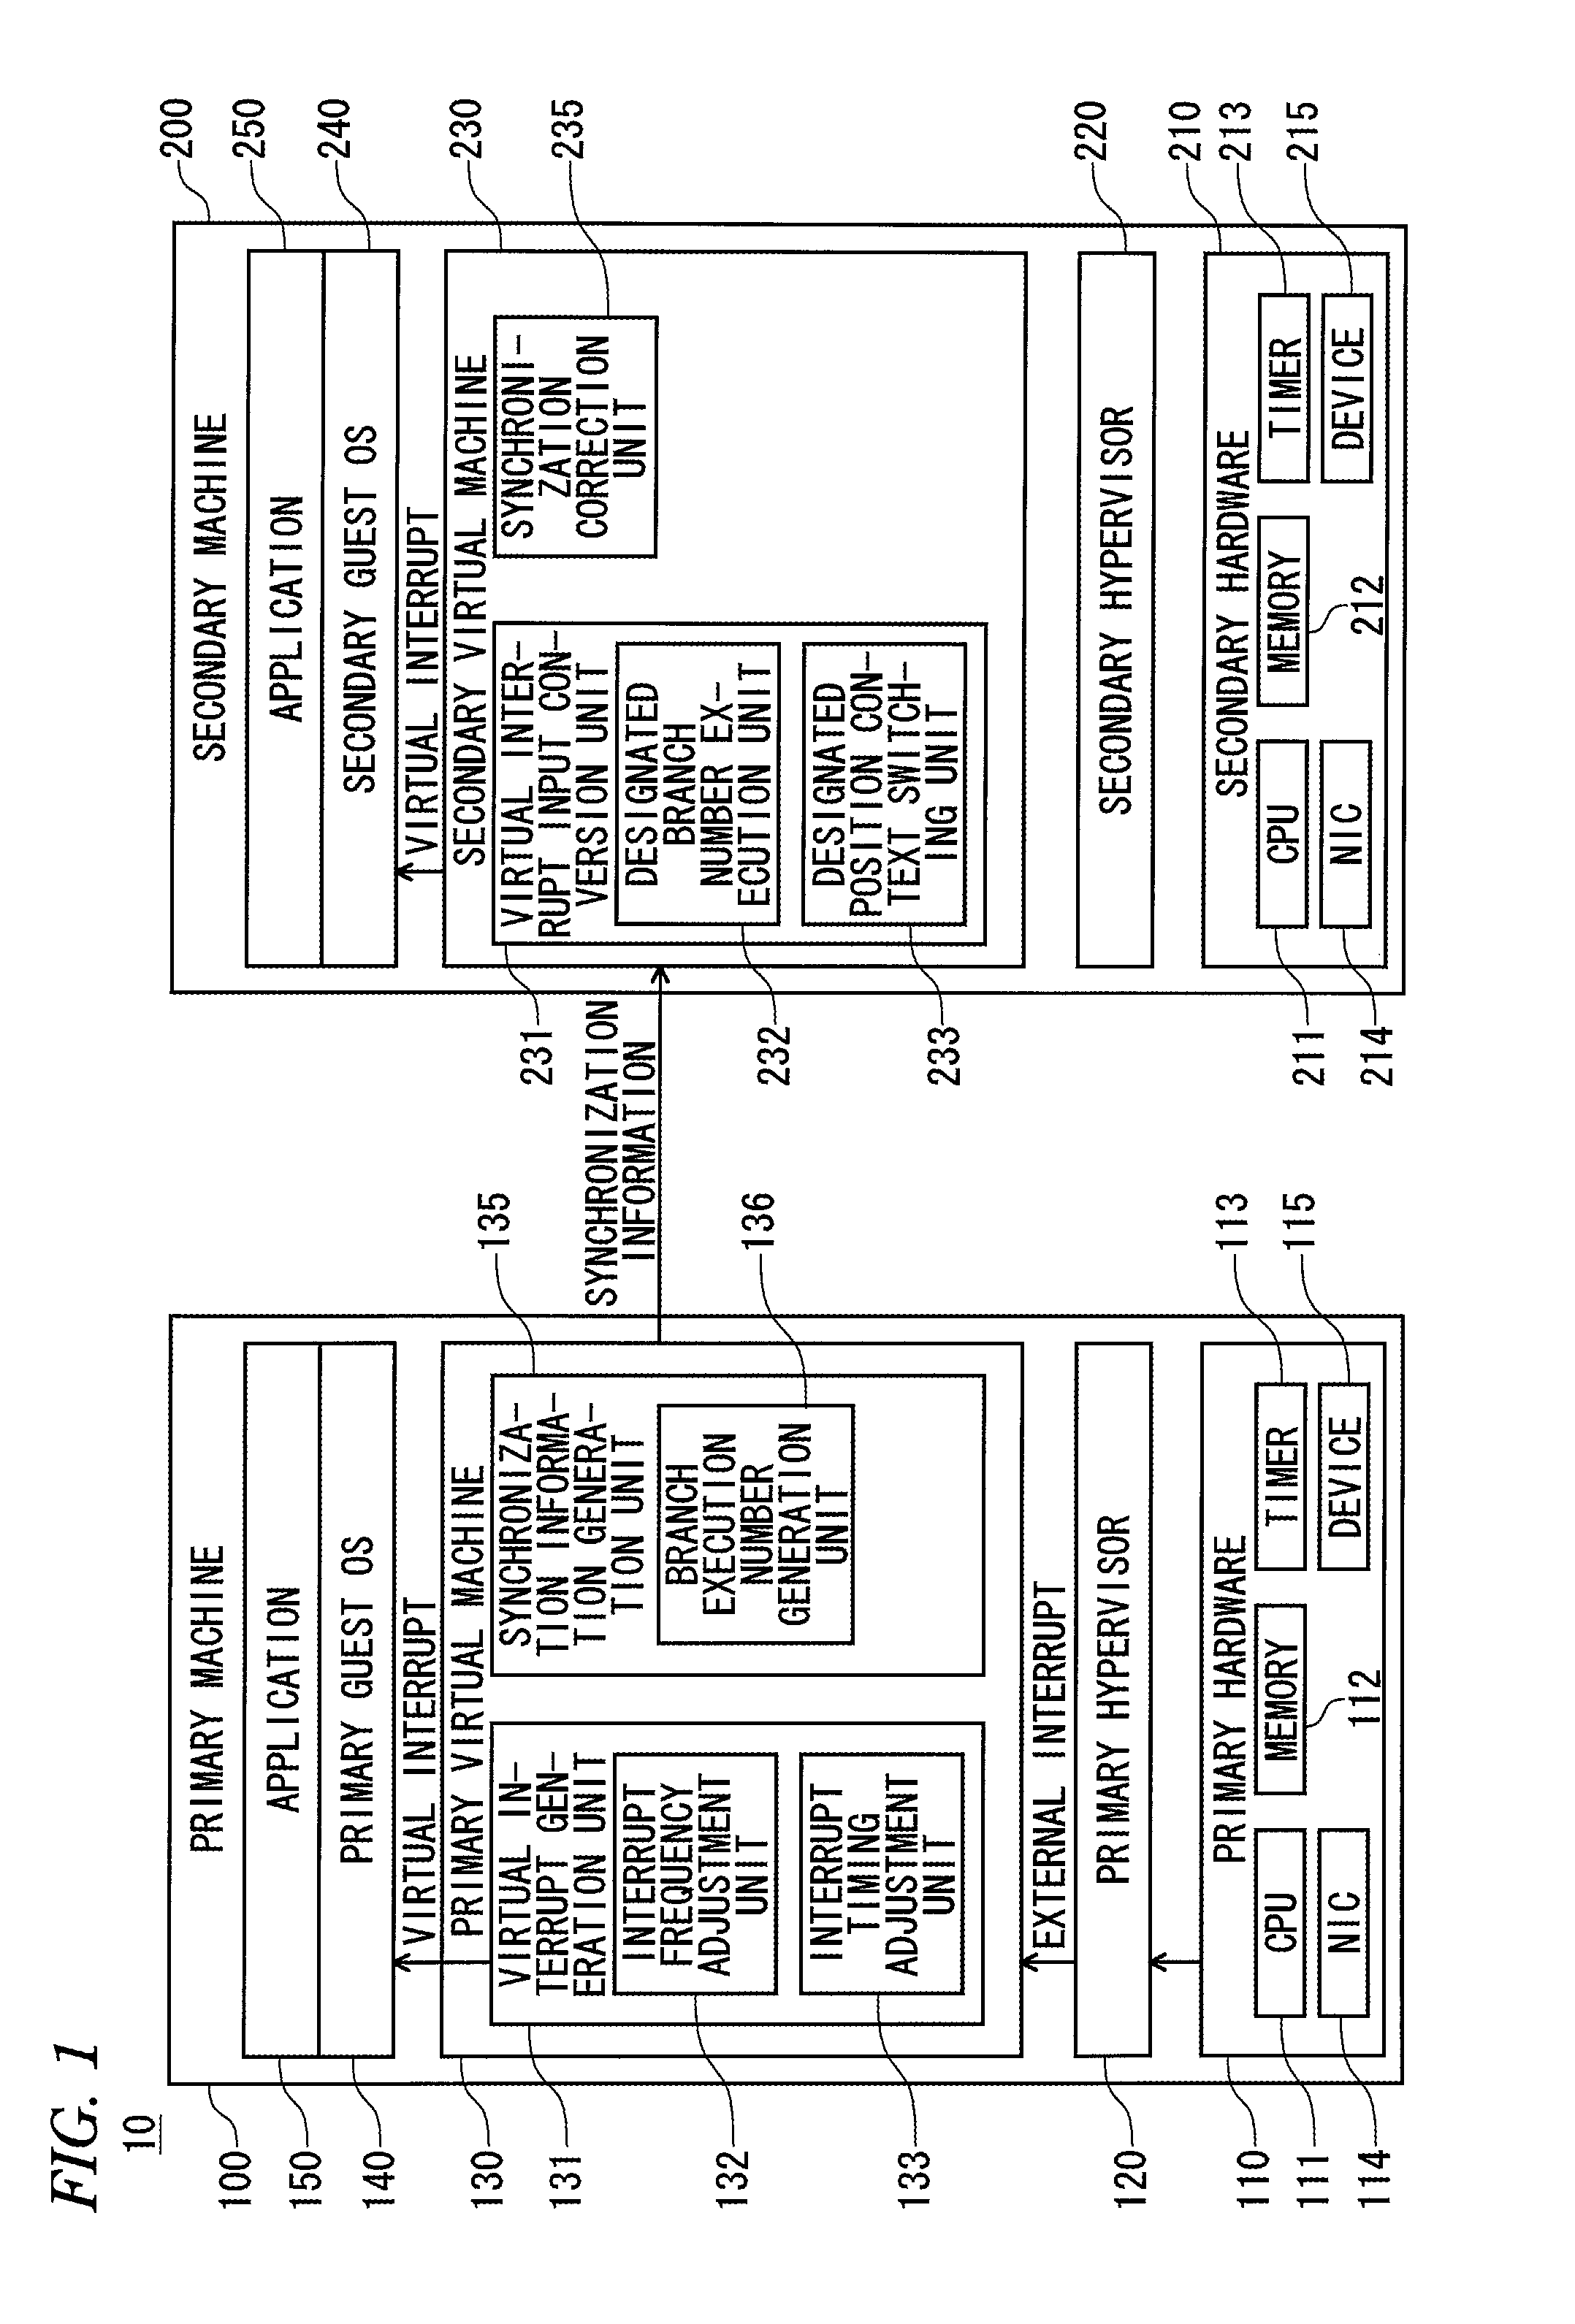 Fault tolerant system and method for performing fault tolerant